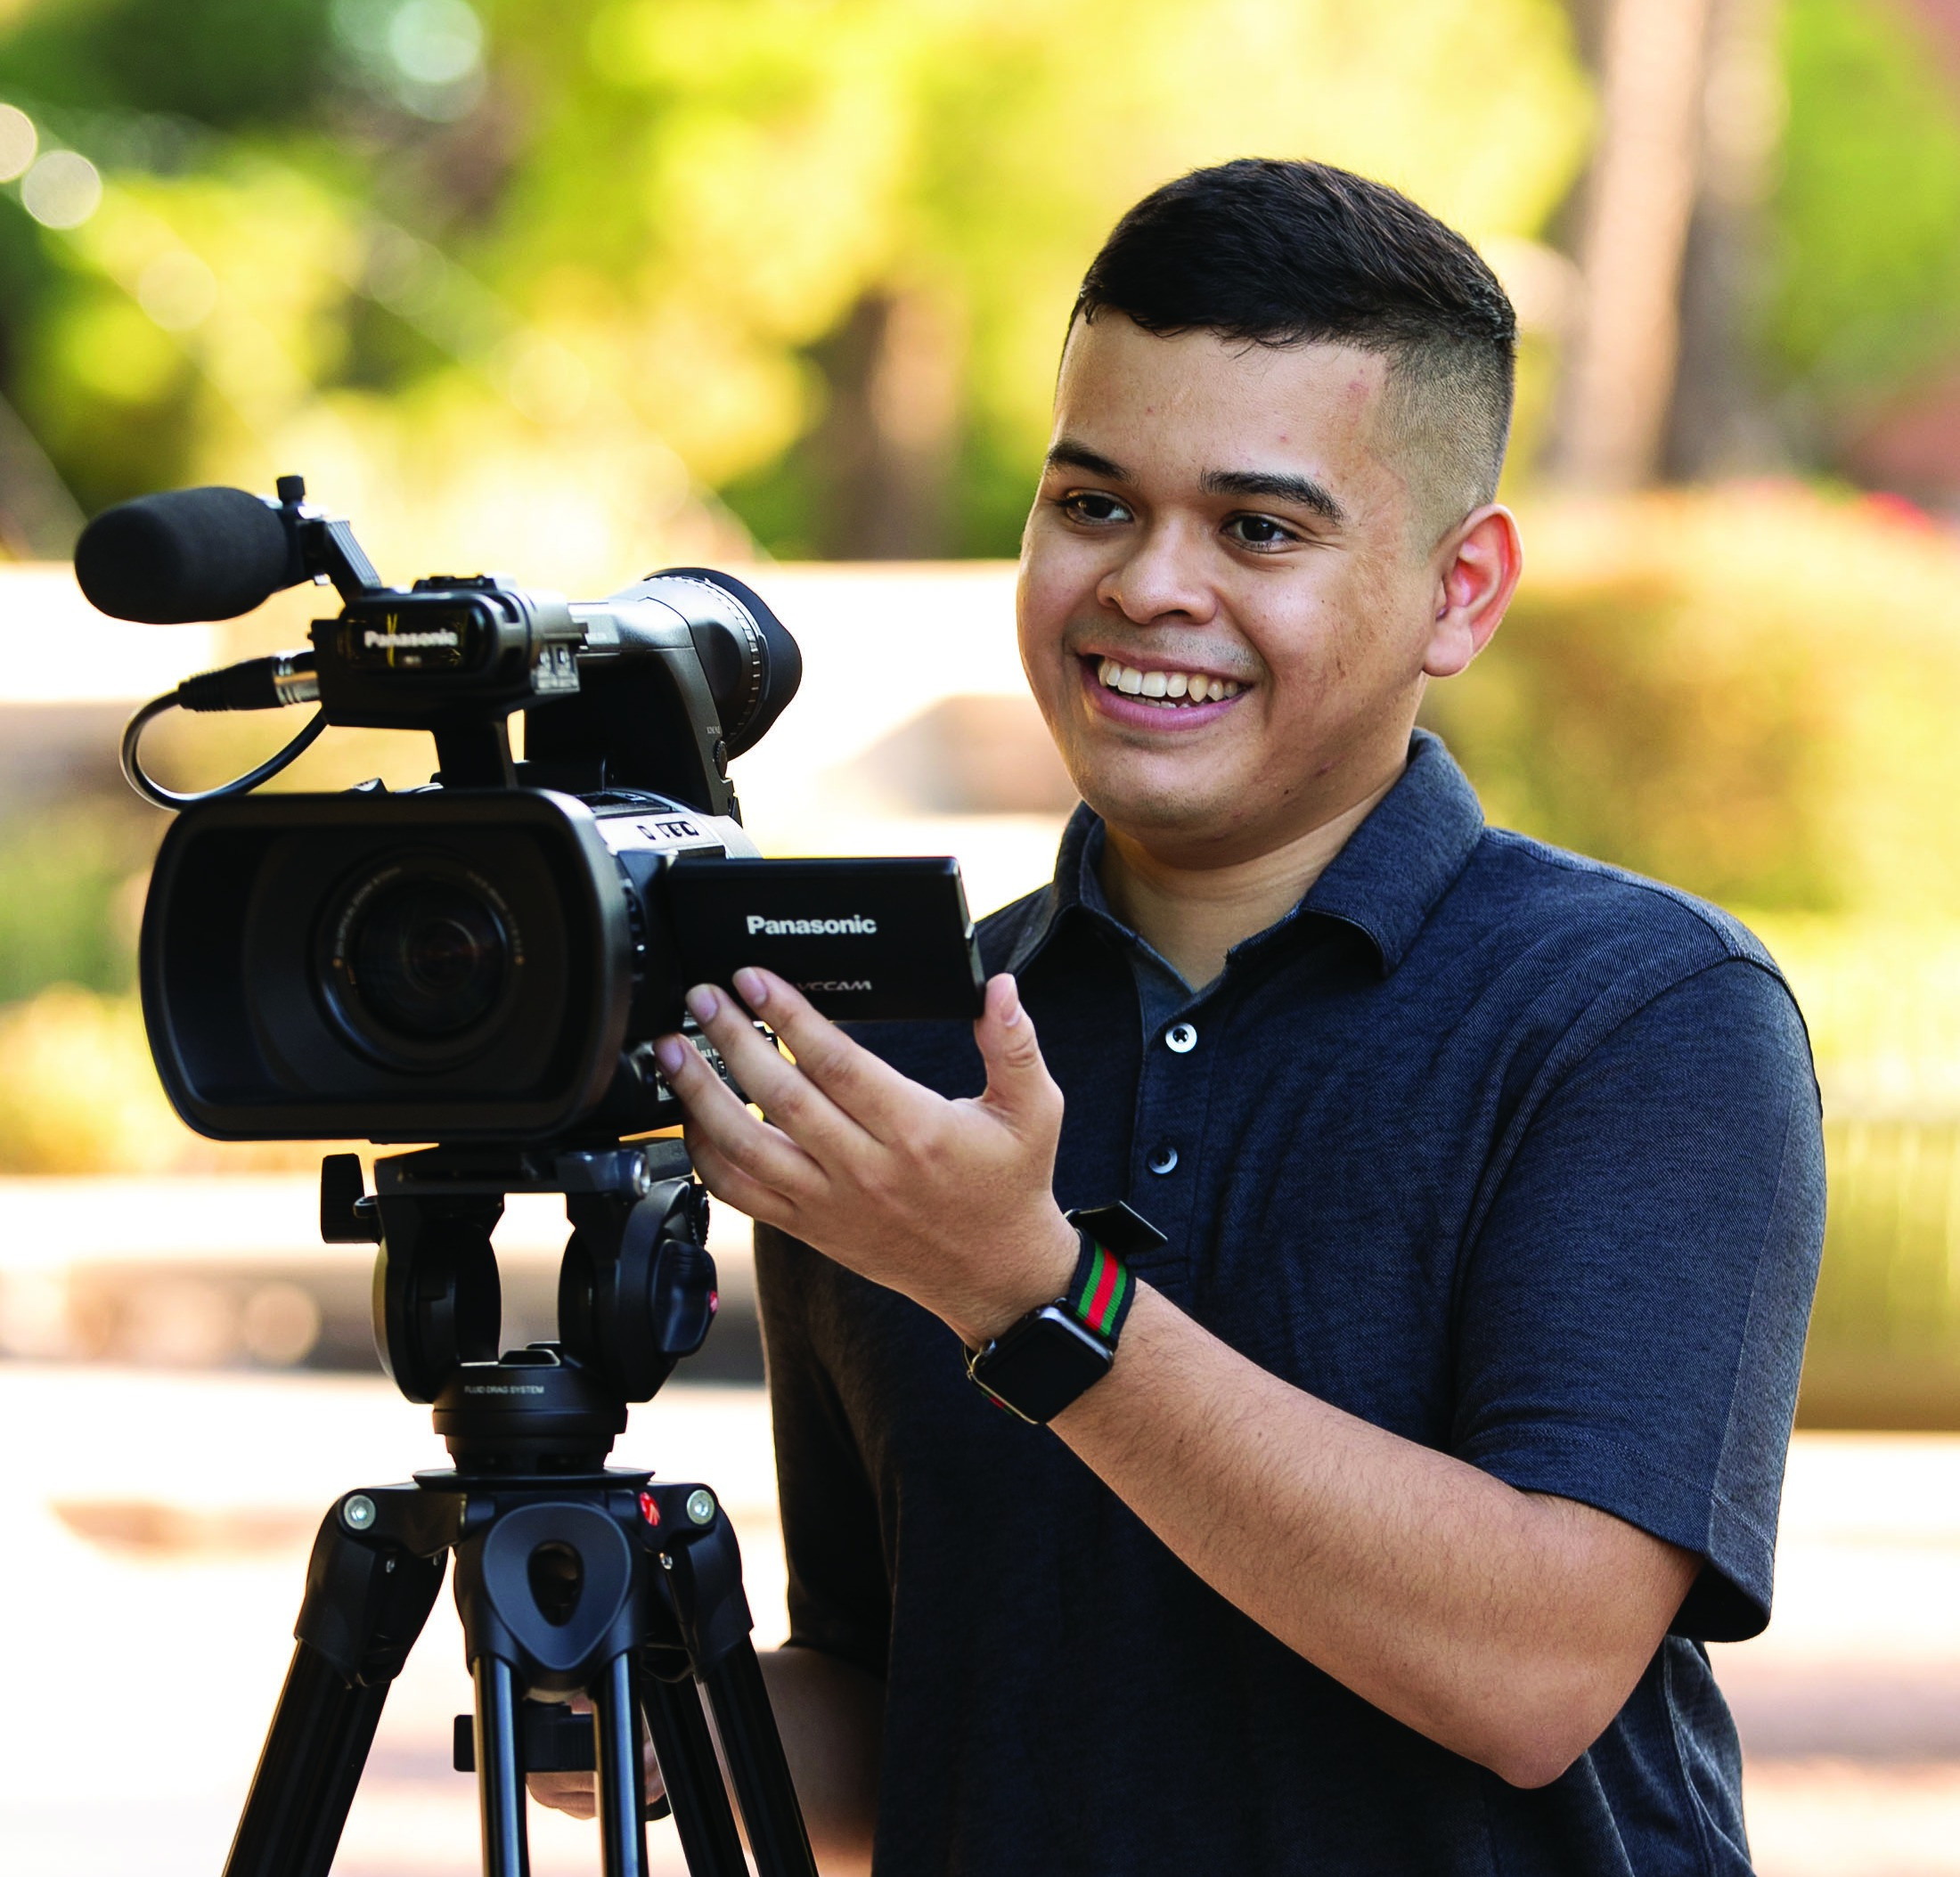 Broadcast student Hector Ponce